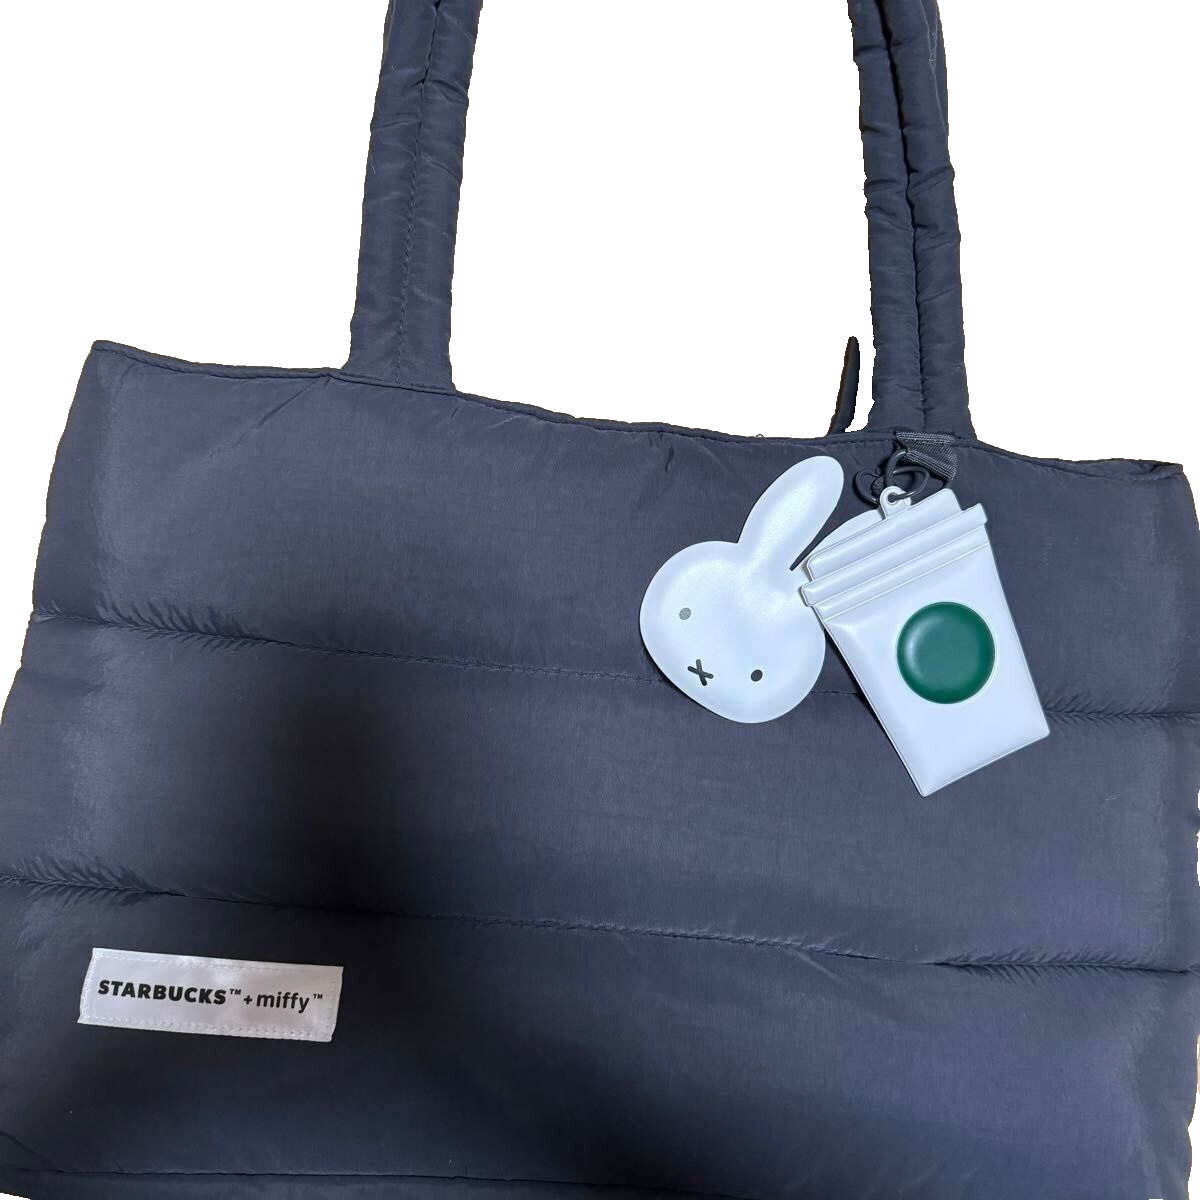 Singapore Starbucks x Miffy Collaboration Tote Bag Black Limited 2406Y